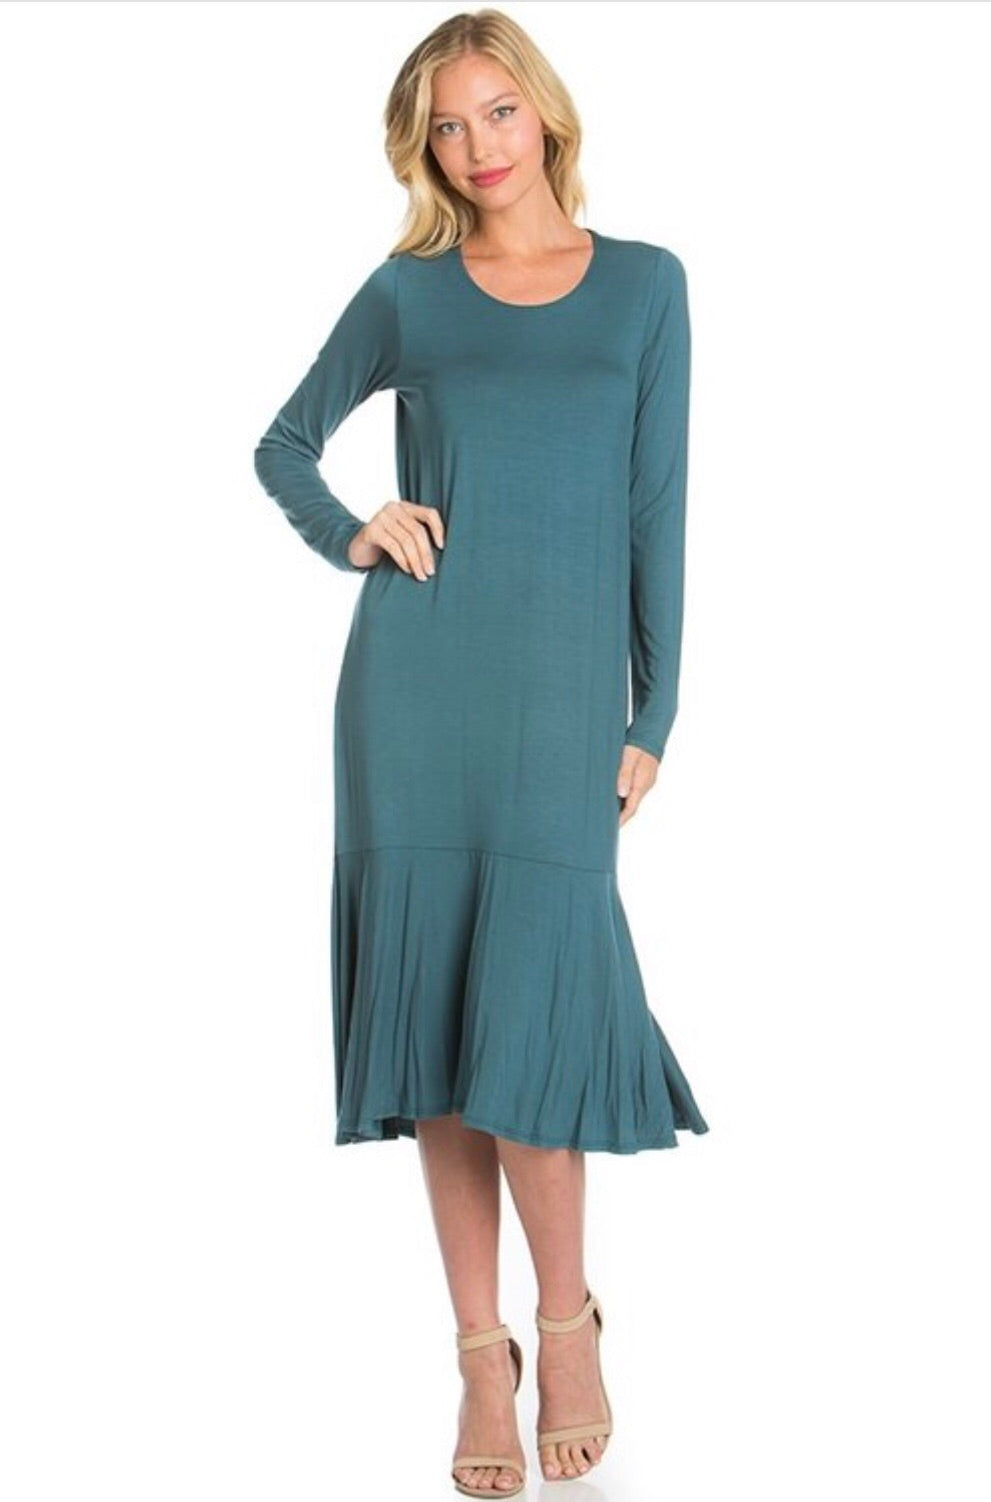 Tiffany Long Sleeve Dress - Corinne an Affordable Women's Clothing Boutique in the US USA